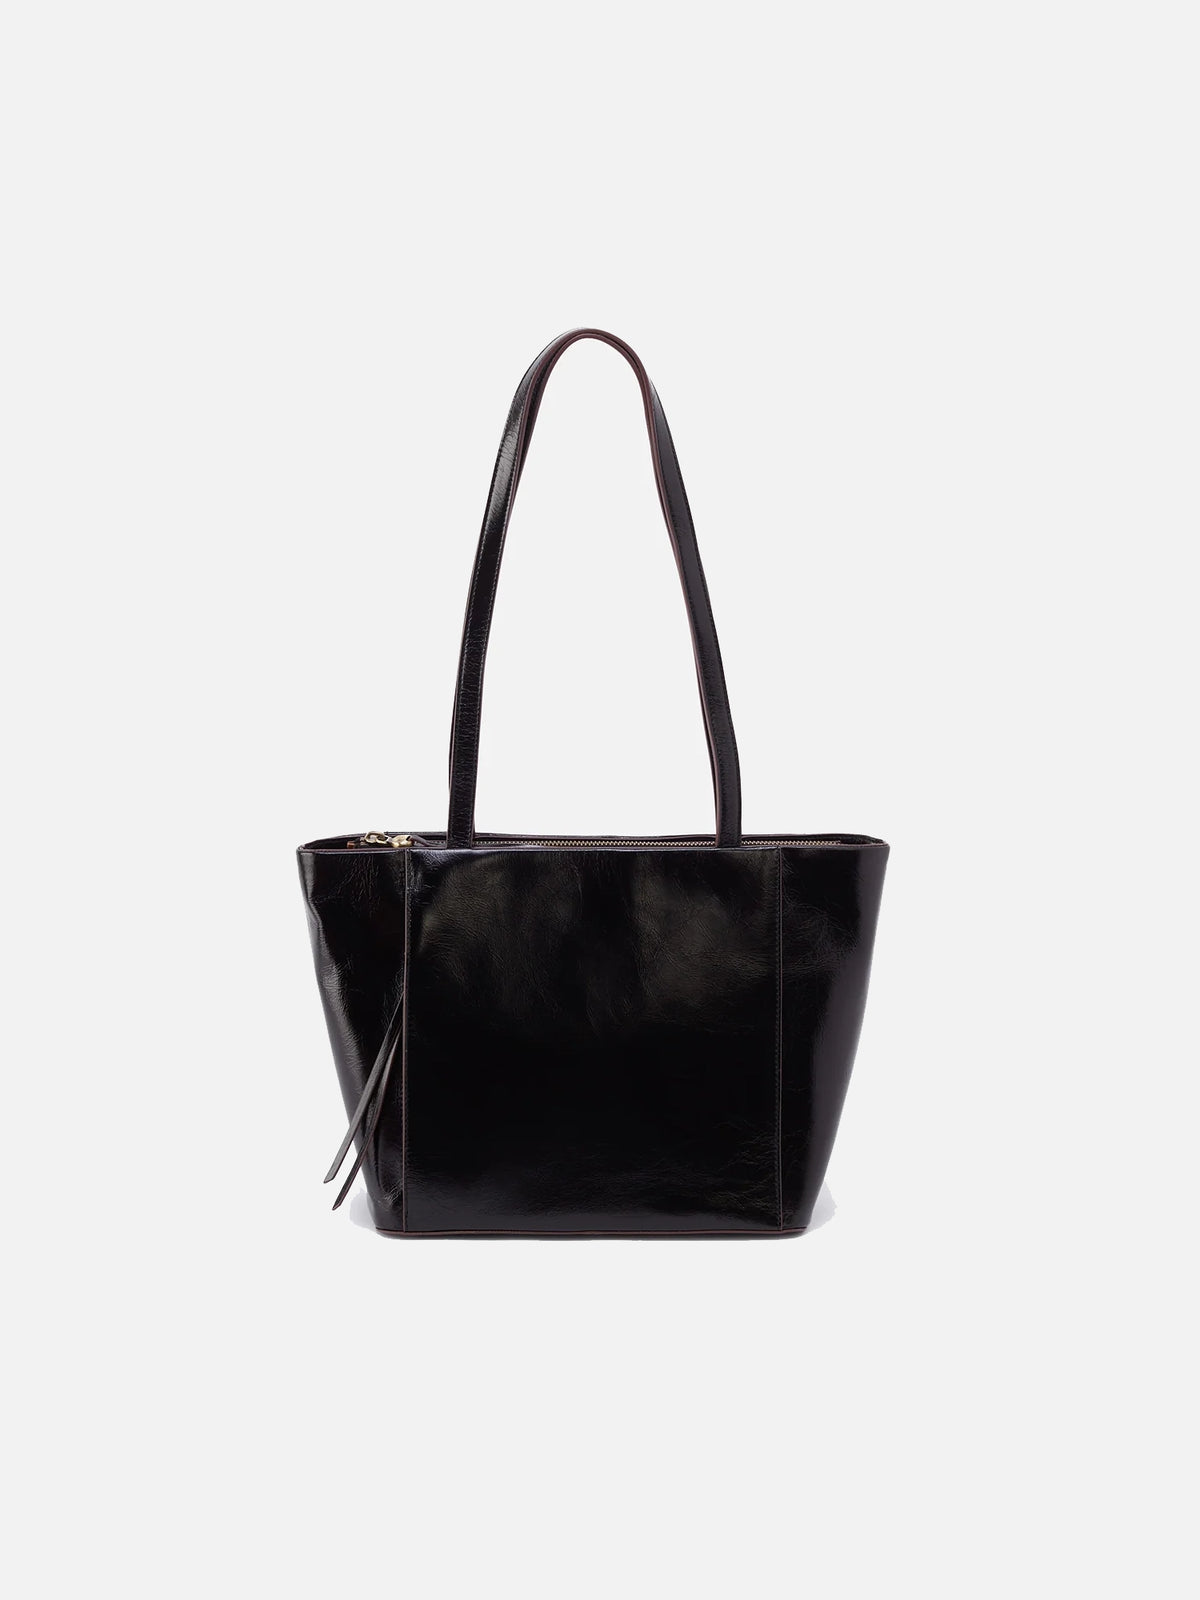 hobo haven tote bag in black polished leather